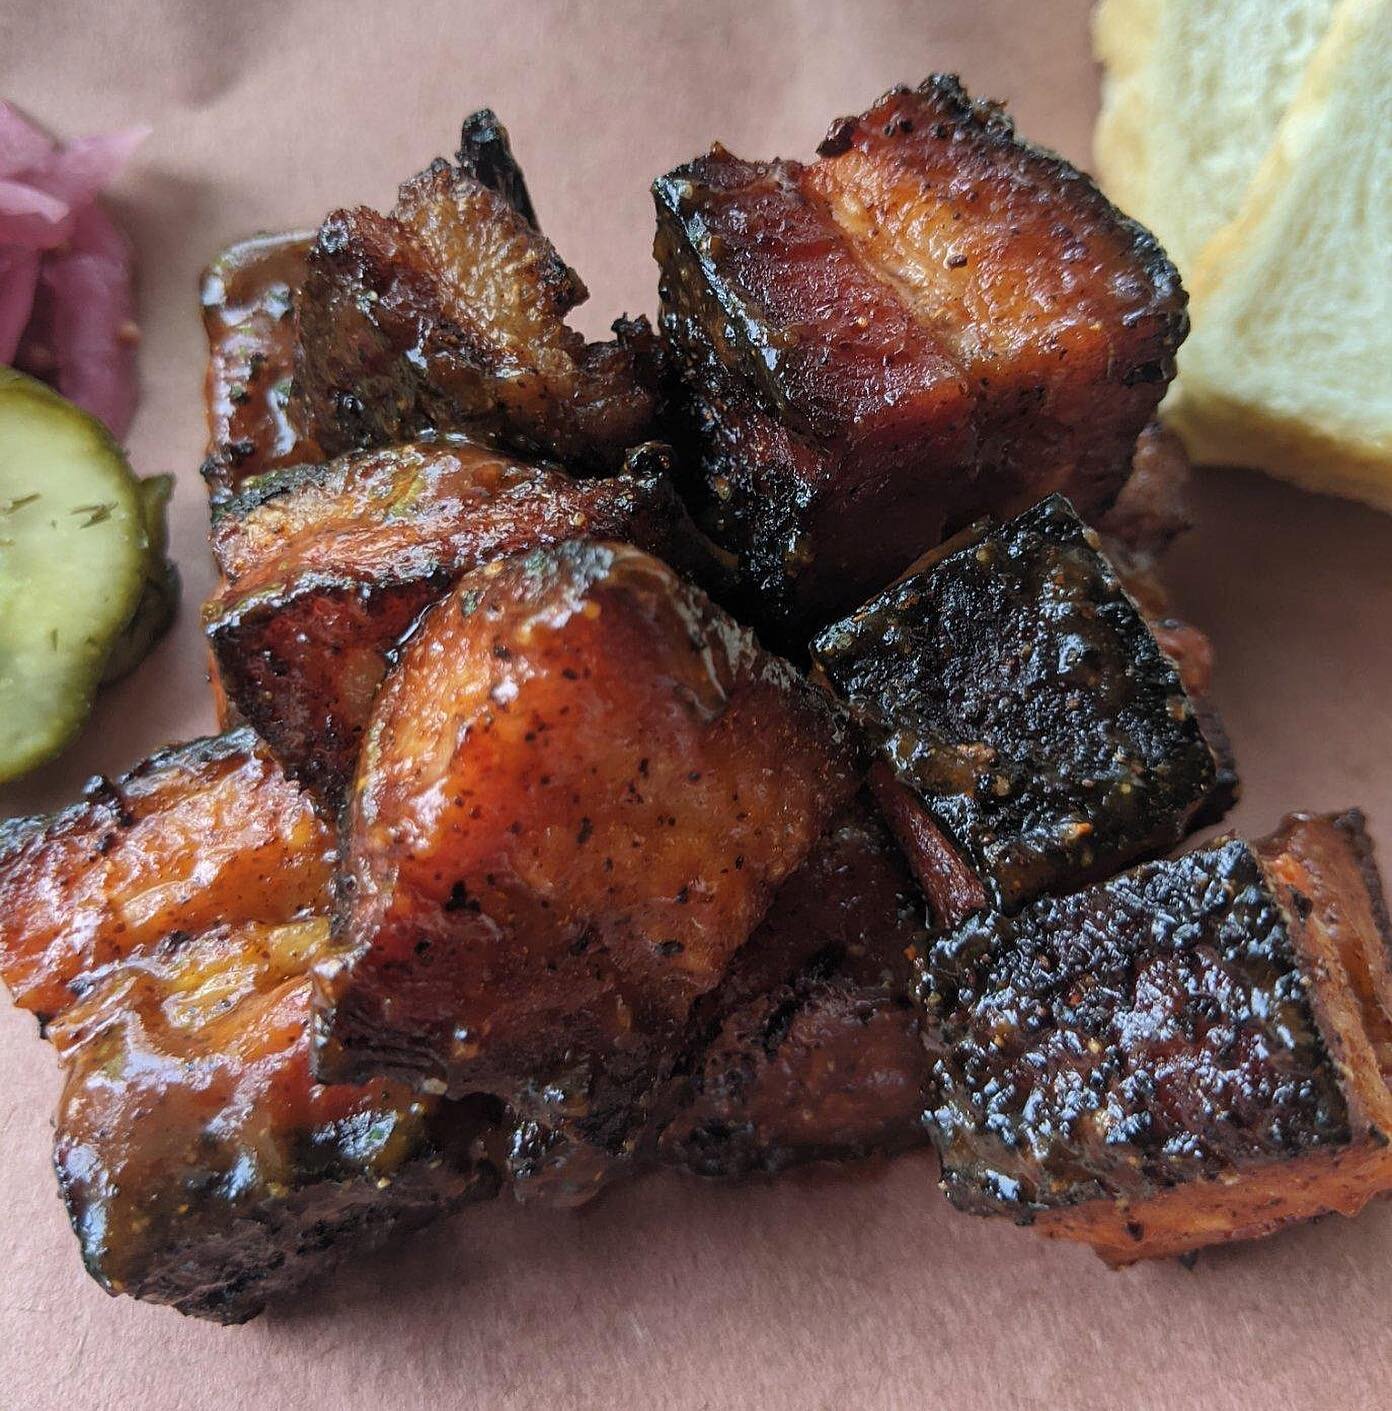 Pork belly burnt end special today. AMAZING. 🐷 Limited quantities, in person orders only.